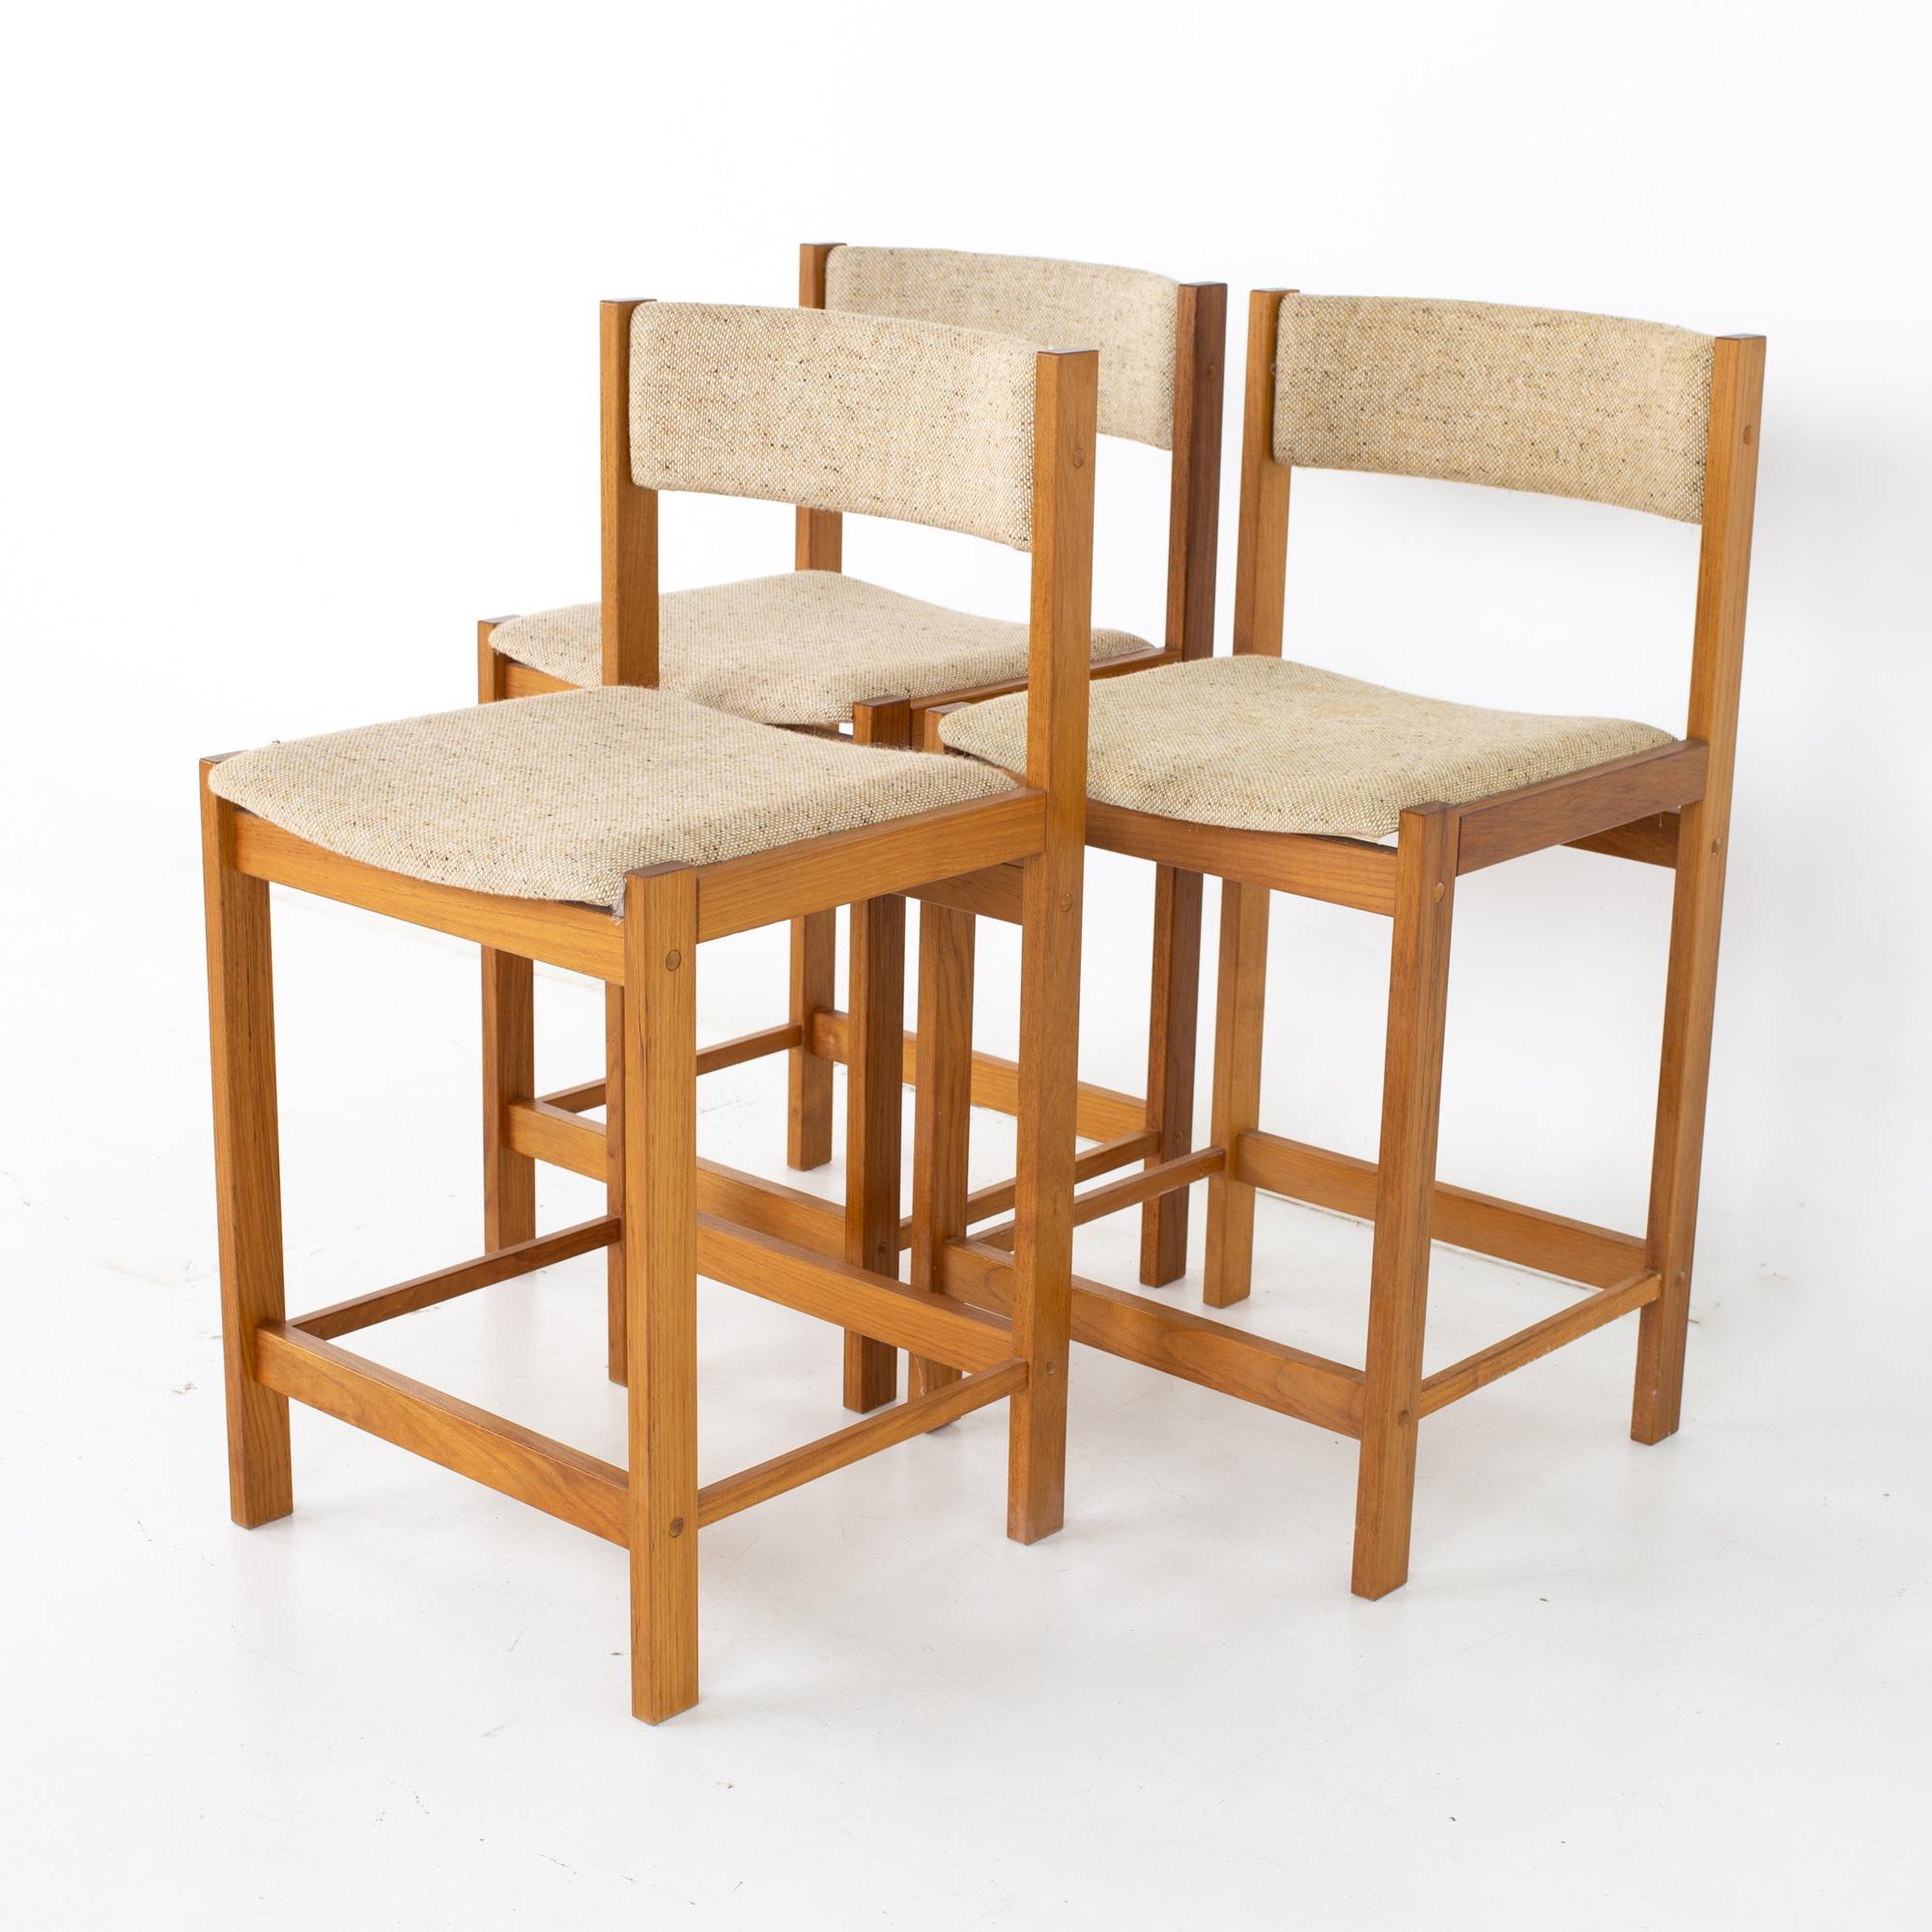 D Scan mid century teak counter bar stools, set of 3
Each stool measures: 18.5 wide x 17.25 deep x 35.5 high, with a seat height of 24 inches

All pieces of furniture can be had in what we call restored vintage condition. That means the piece is